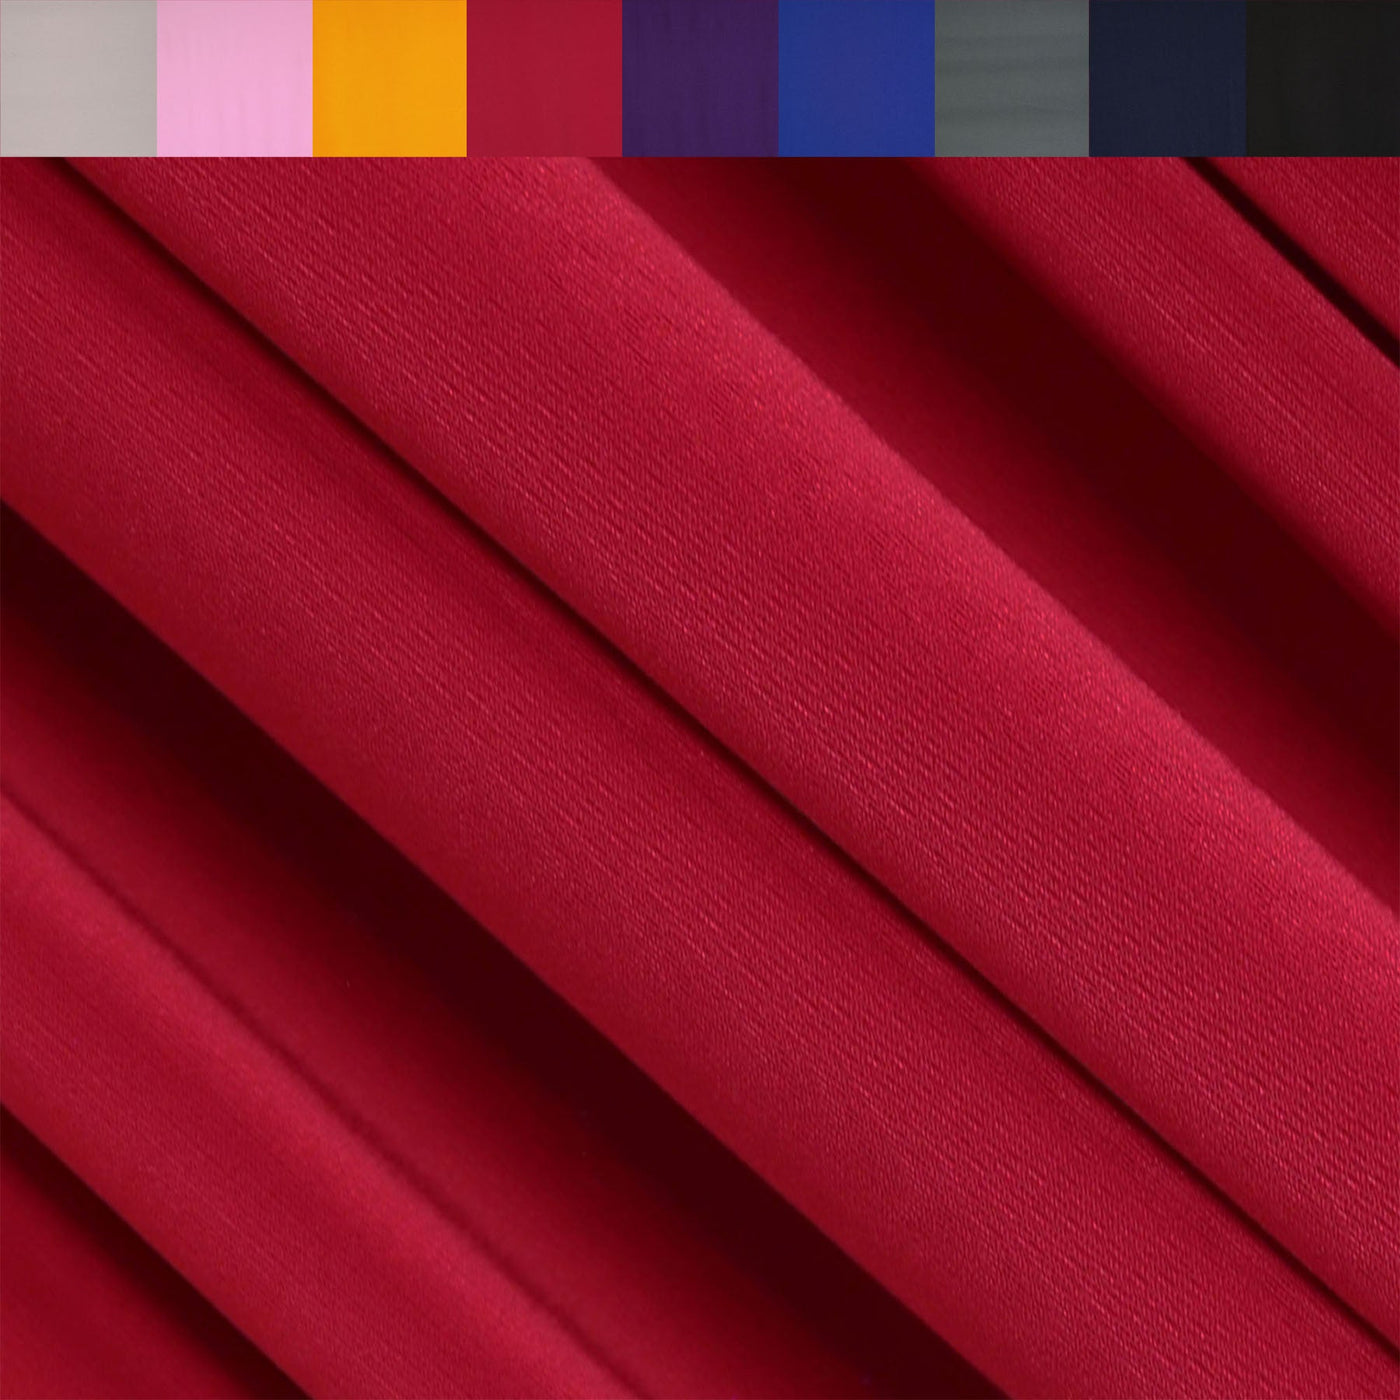 ITY Polyester Spandex Fabric | Red | Shop FabricLA.com